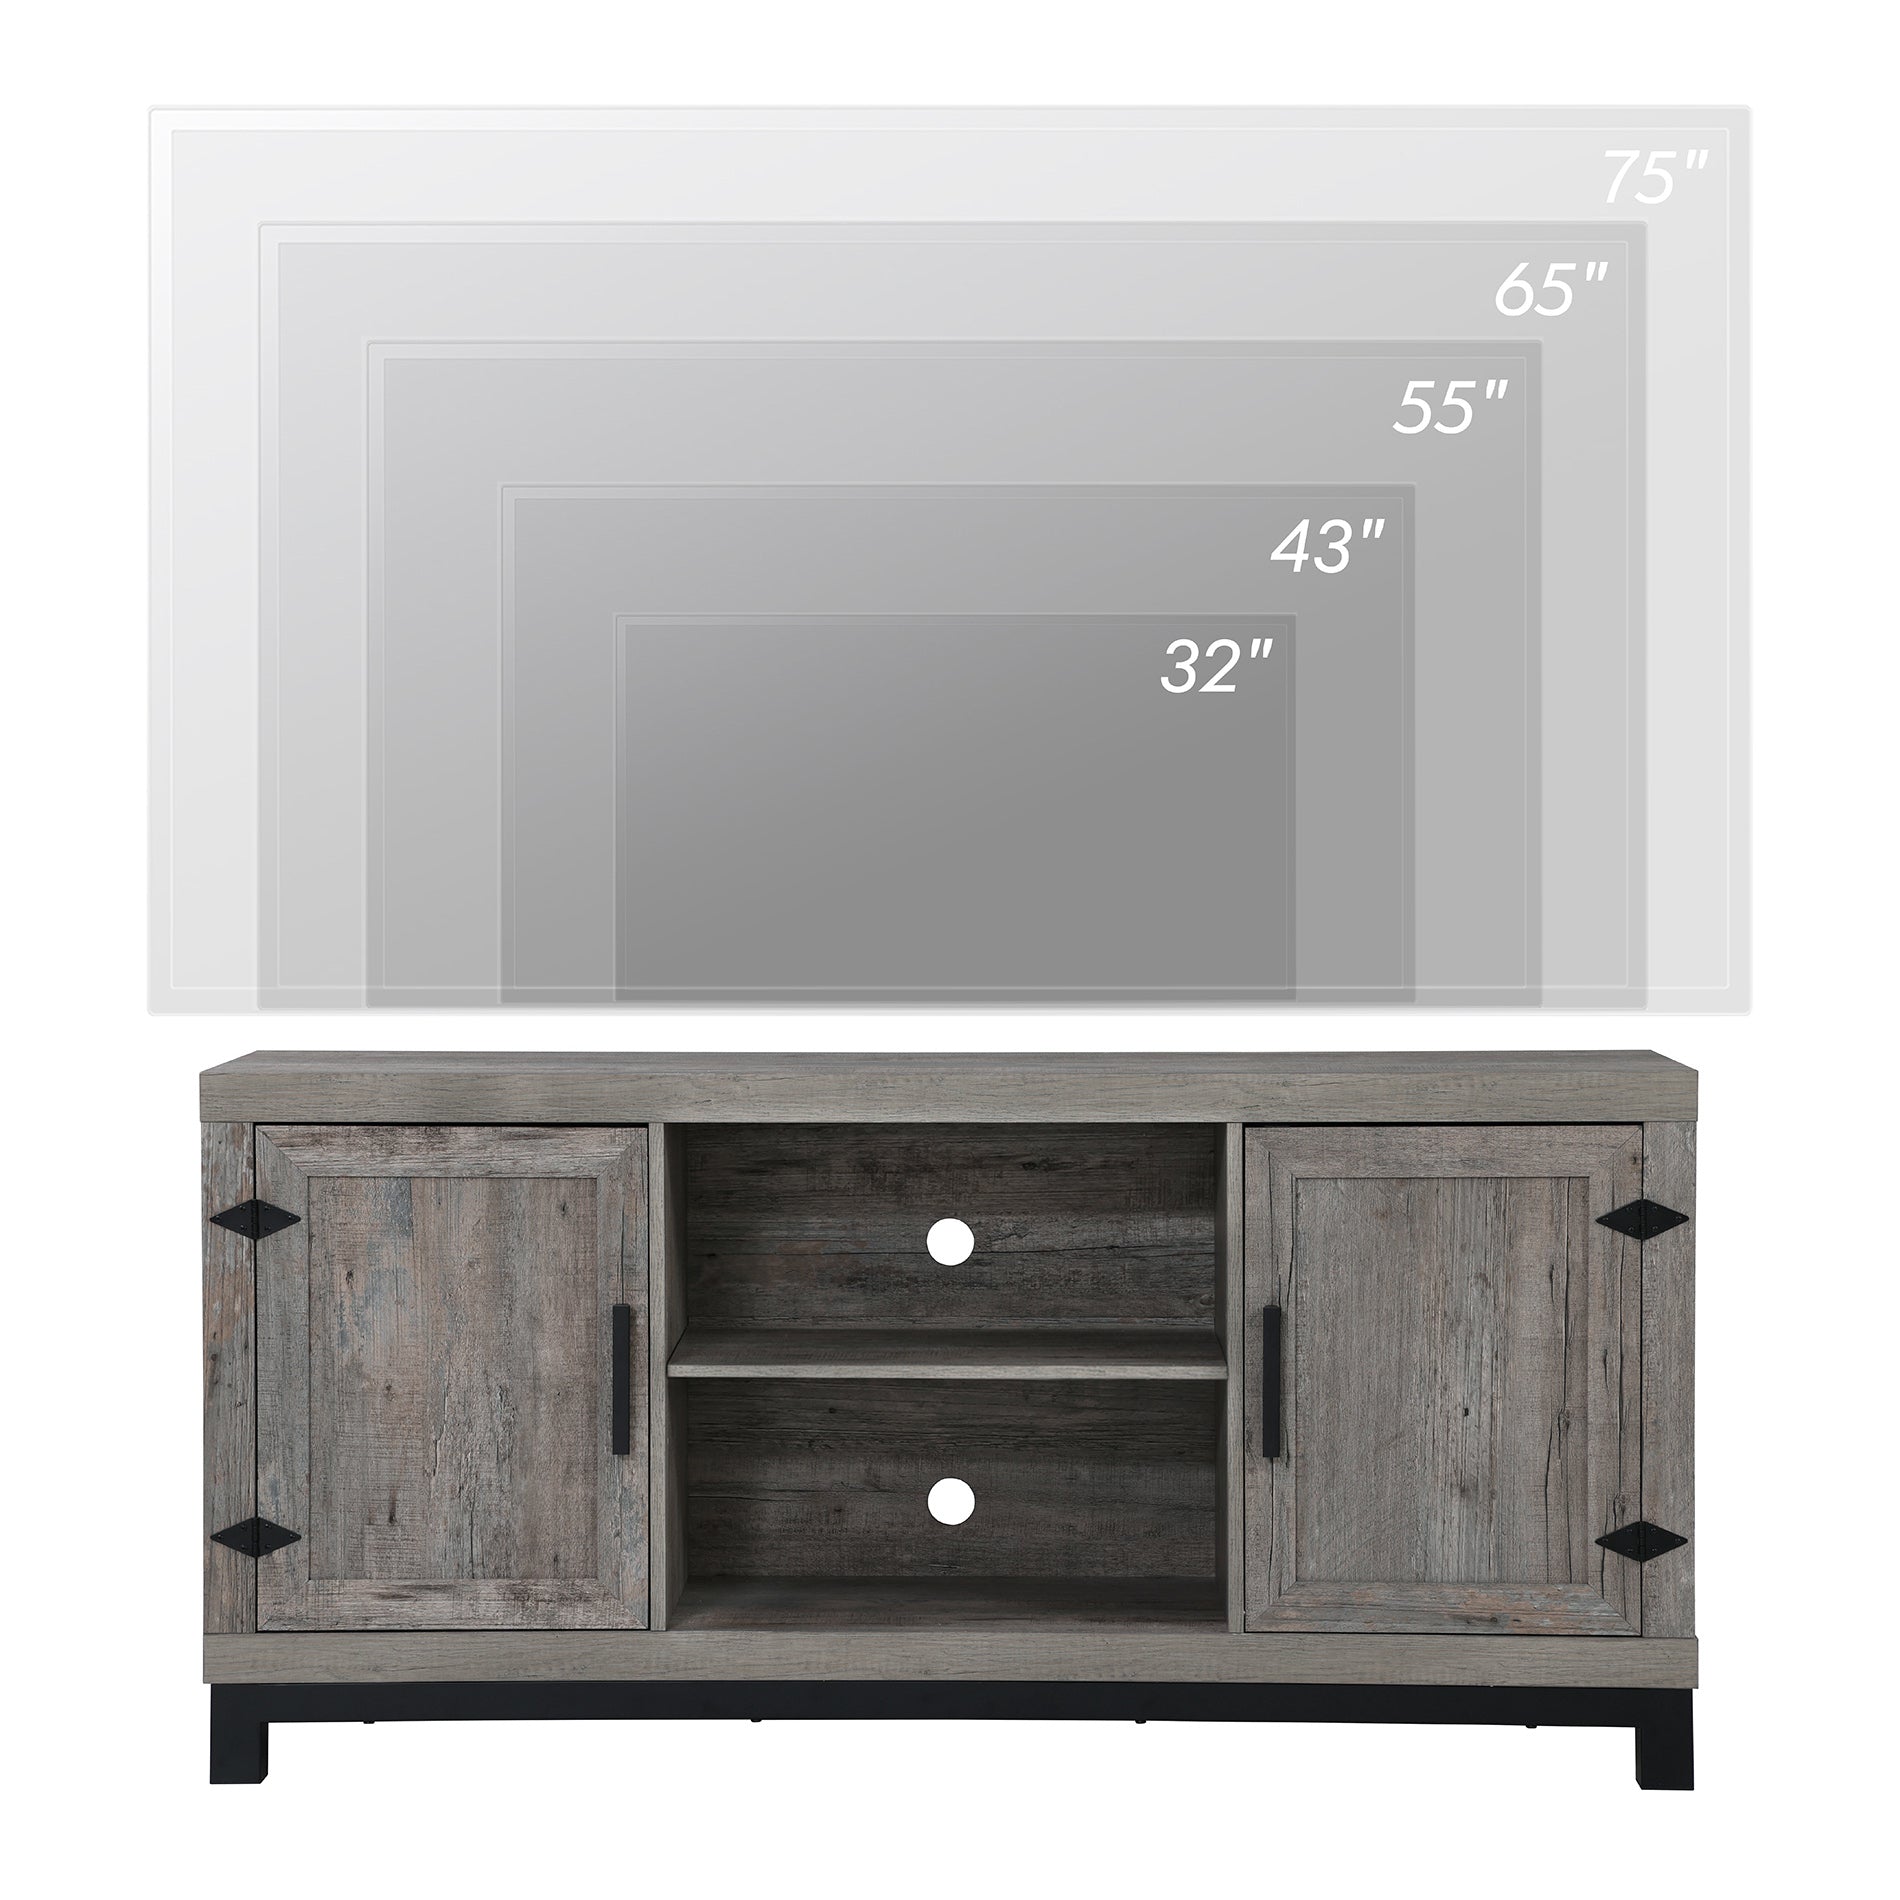 WAMPAT 58" Modern Farmhouse Barn Door TV Stand with LED Light for 32-65 Inch TV, Grey